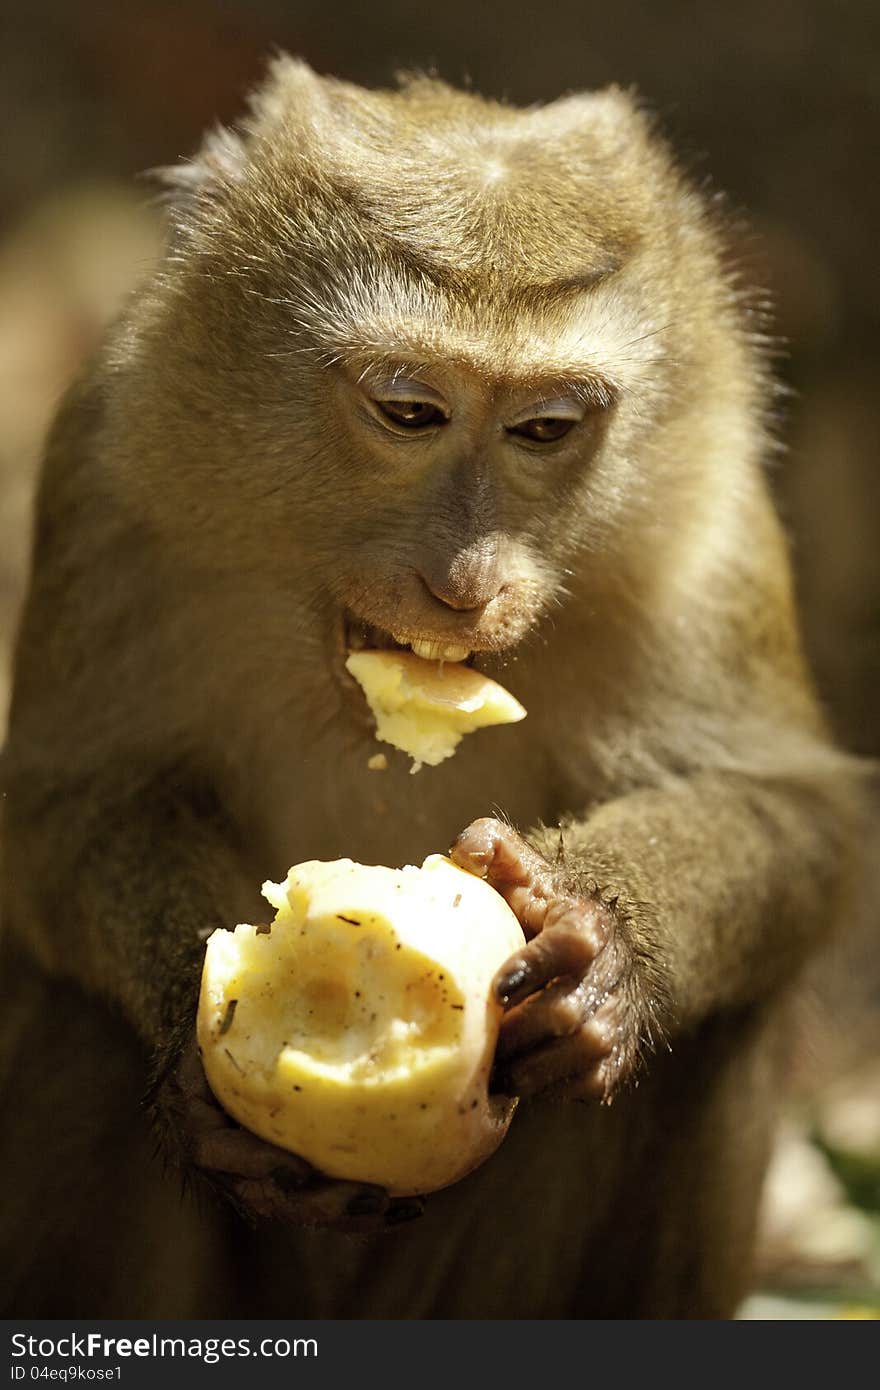 Wild monkey eating fruit on monkey hill in Phuket. Close up of monkey after taking a bite from an apple